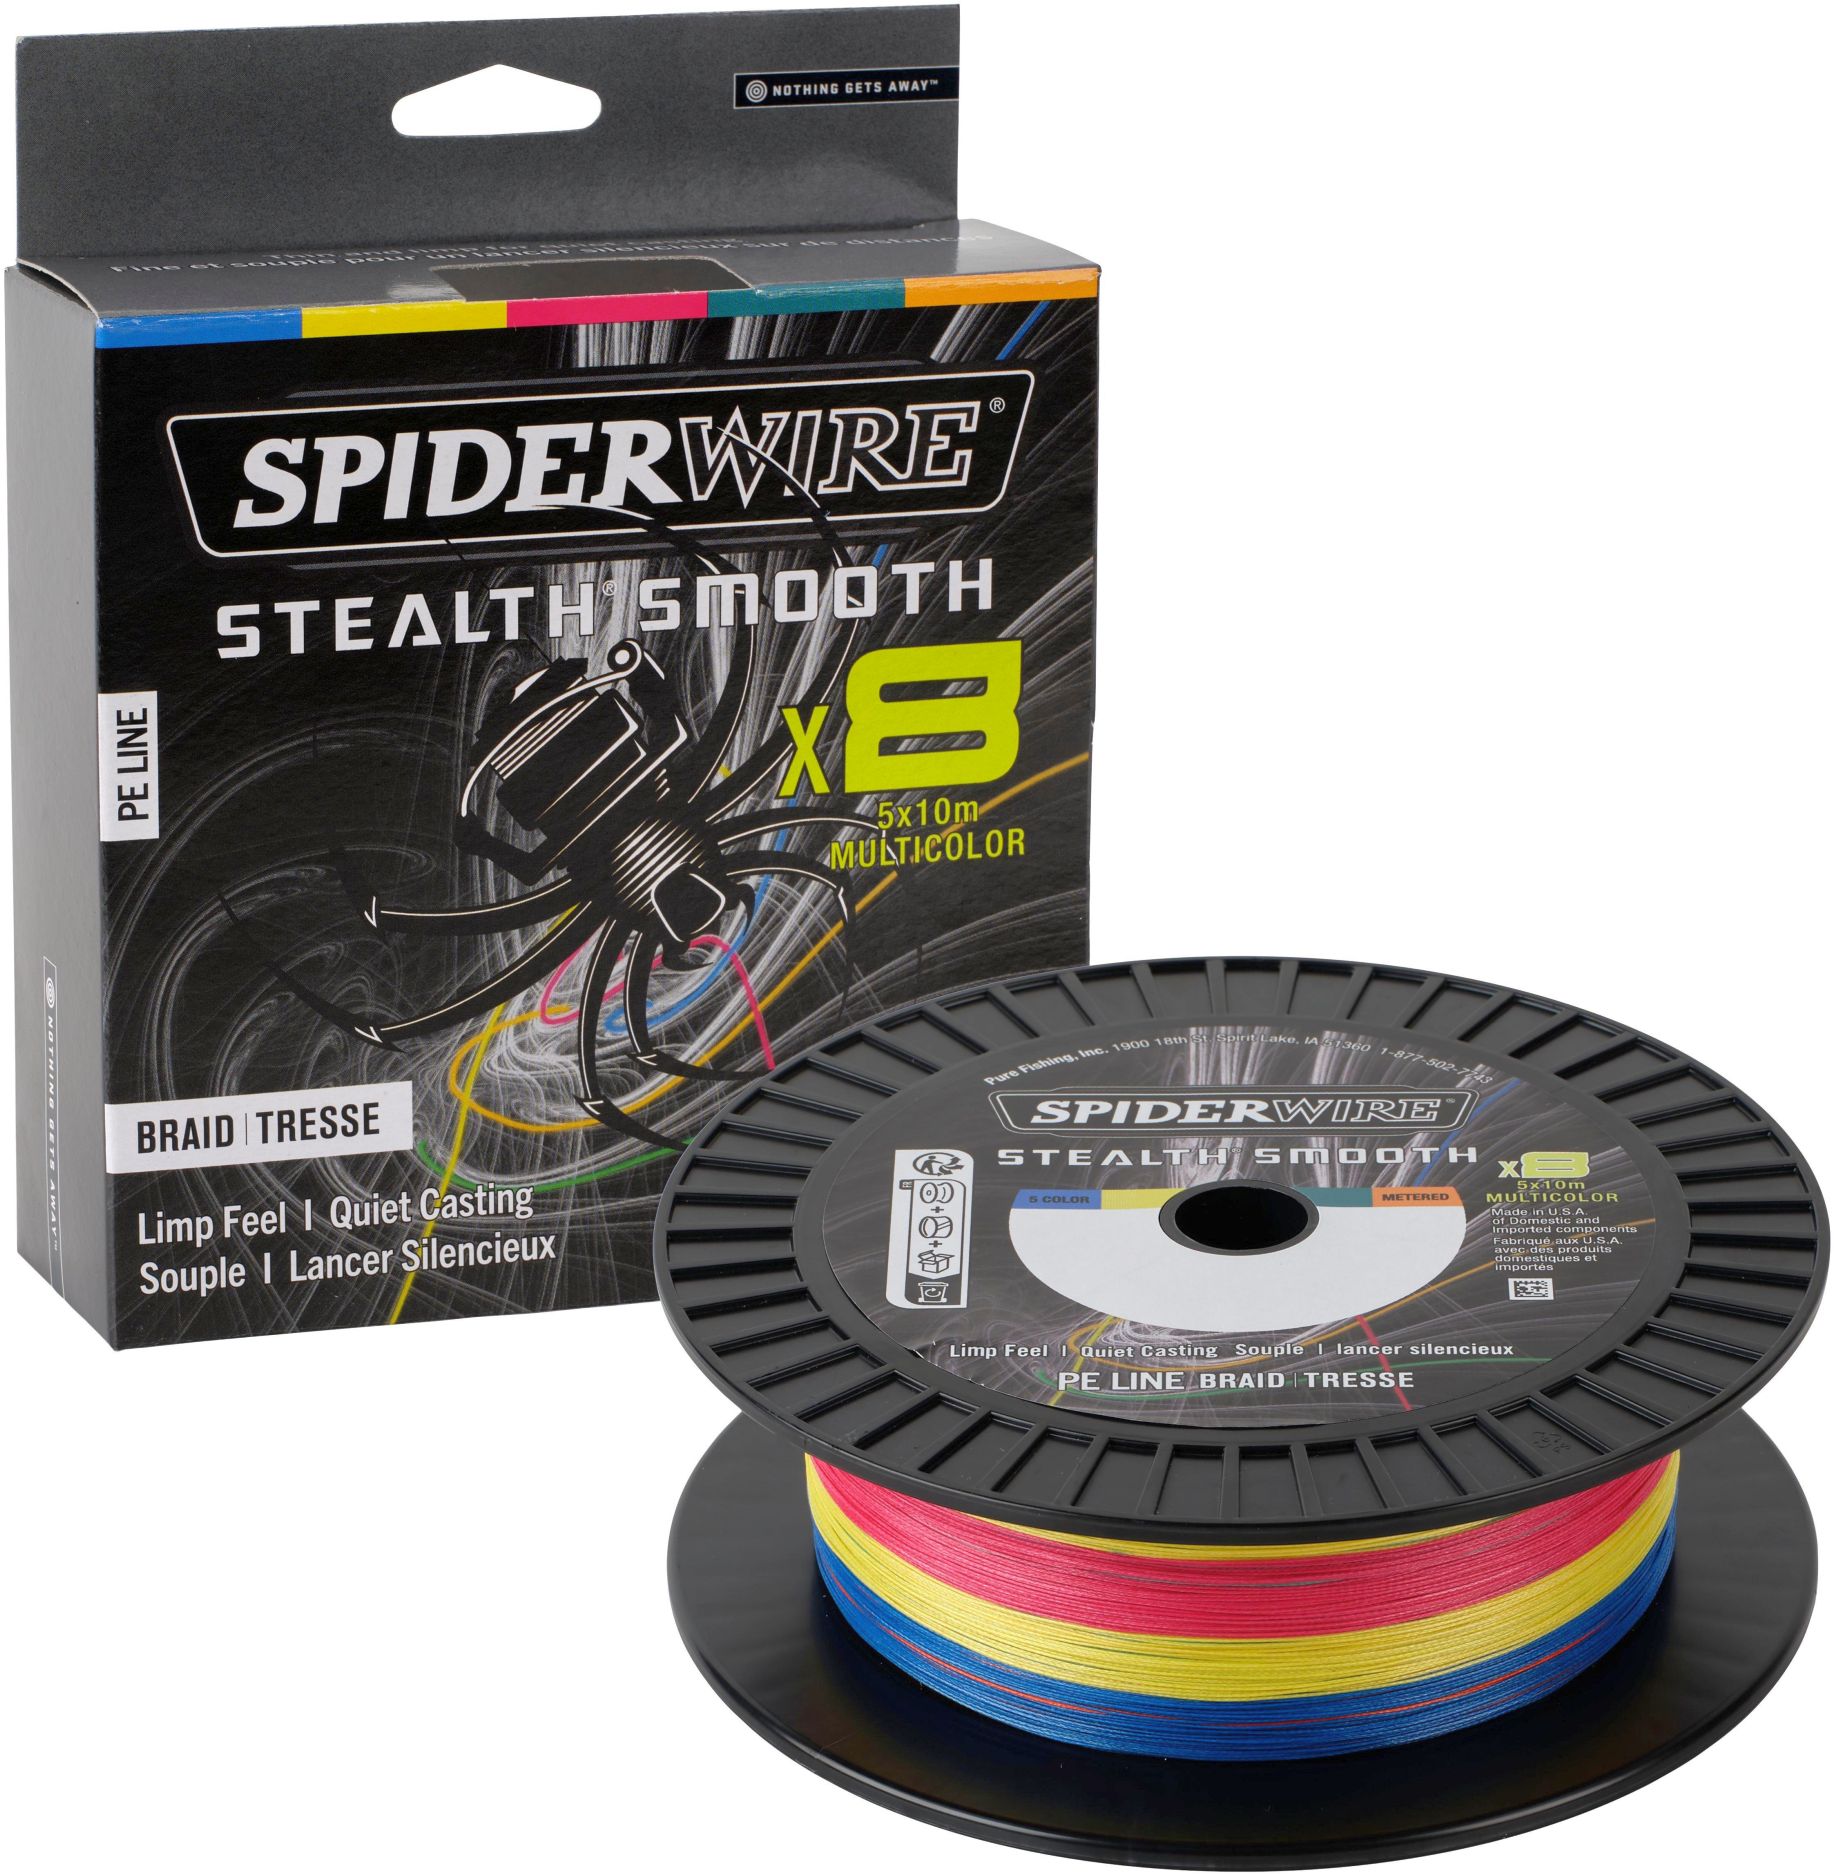 SPIDERWIRE Stealth Smooth 8 Multicolor 600 m 0,33 mm 38,1 kg